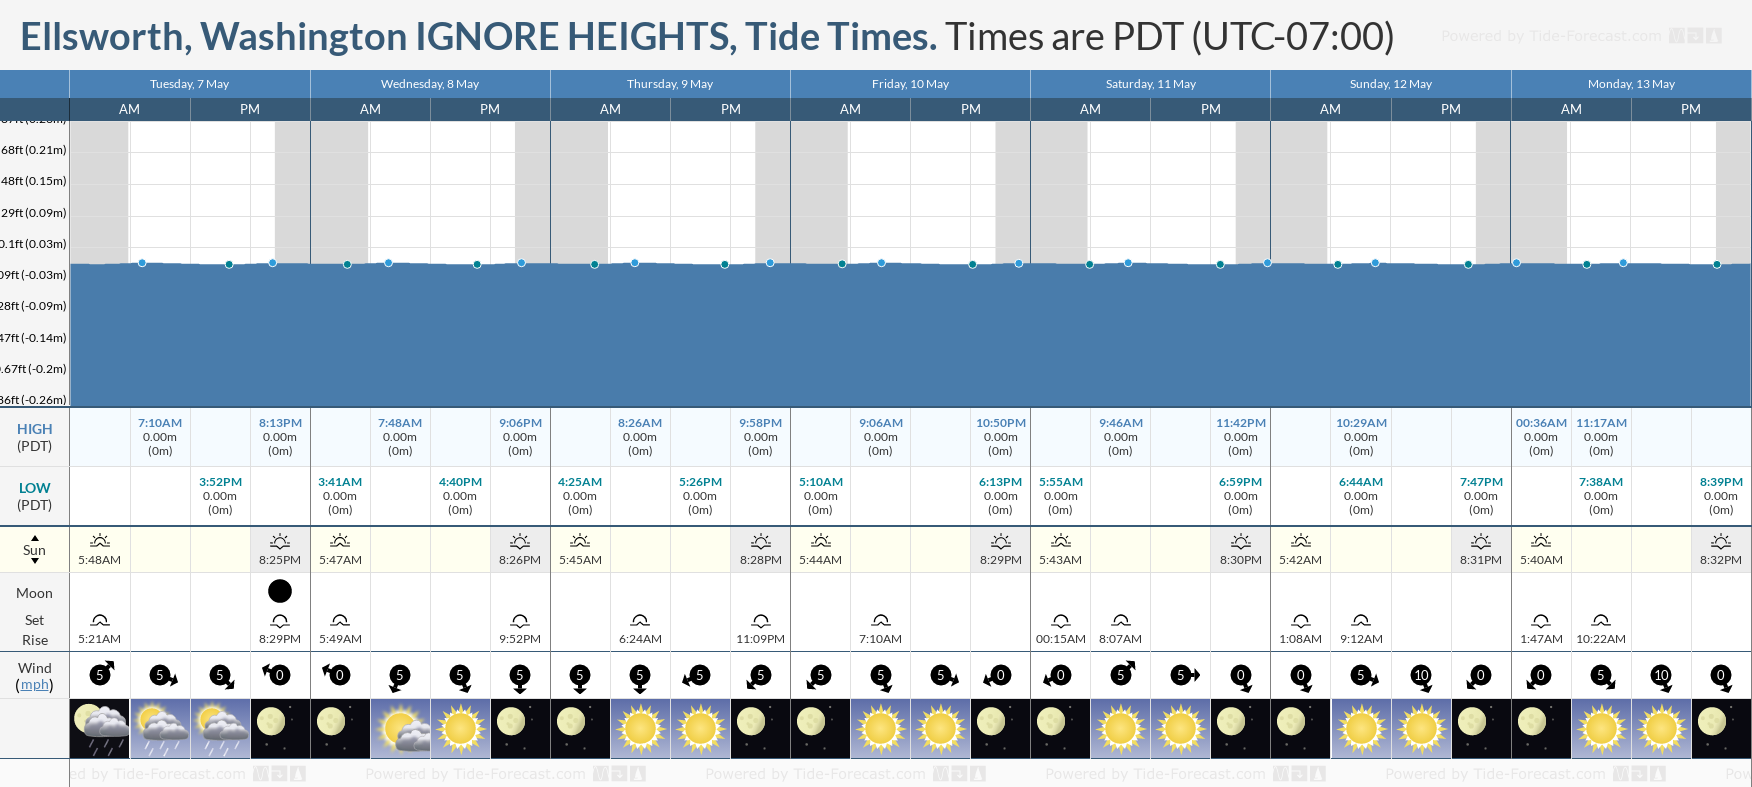 Ellsworth, Washington IGNORE HEIGHTS Tide Chart including high and low tide tide times for the next 7 days